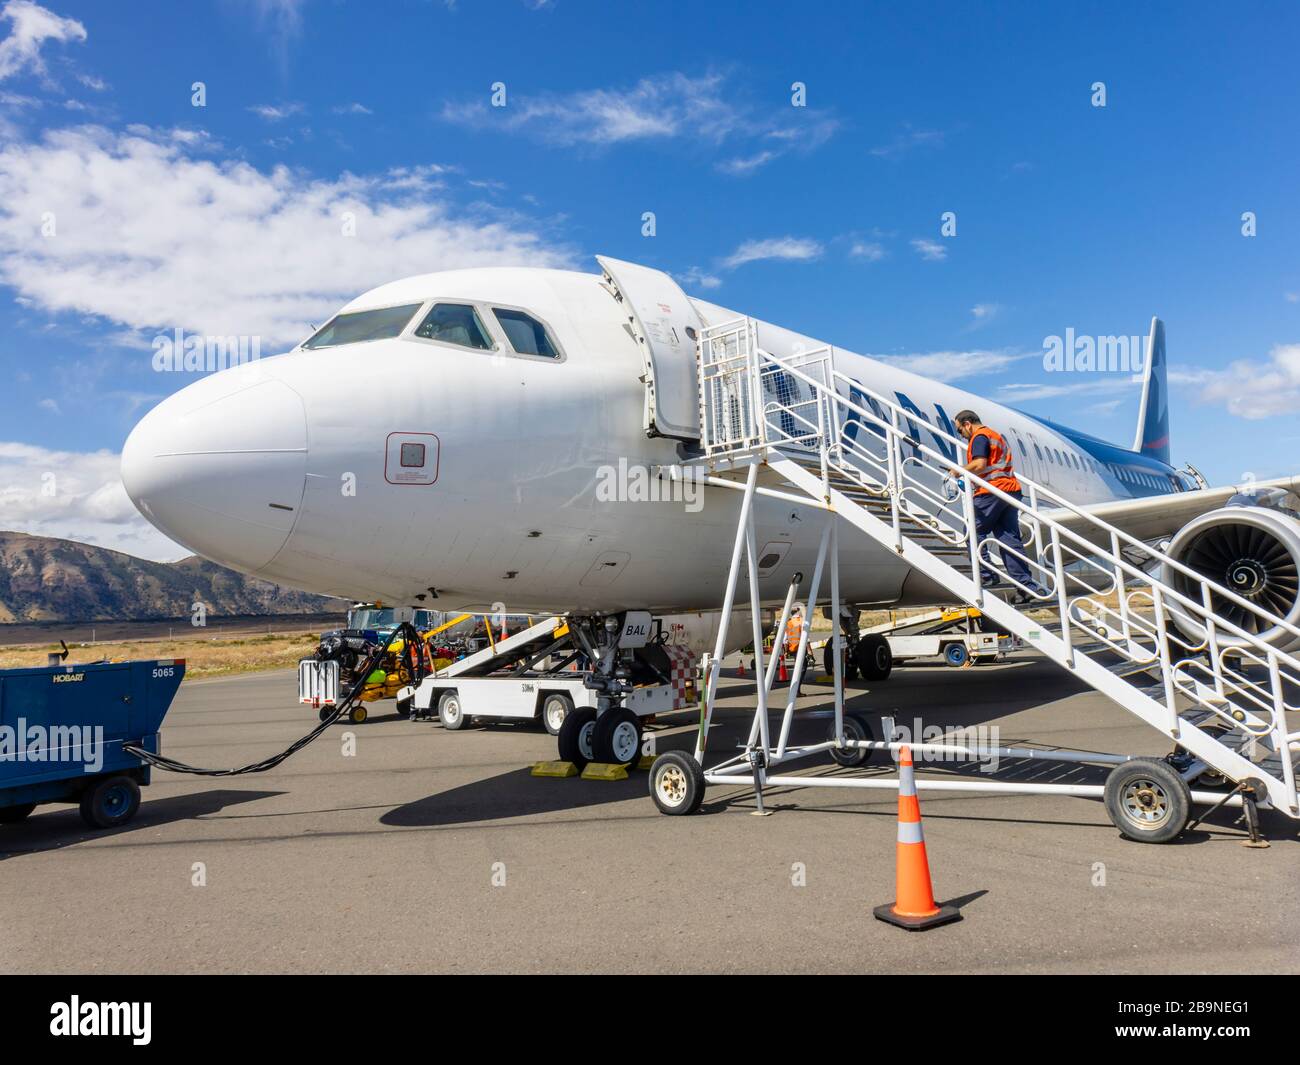 LAN (LATAM Airlines) aircraft on the runway at Teniente Julio Gallardo Airport serving Puerto Natales, Magallanes Region of Patagonia, southern Chile Stock Photo